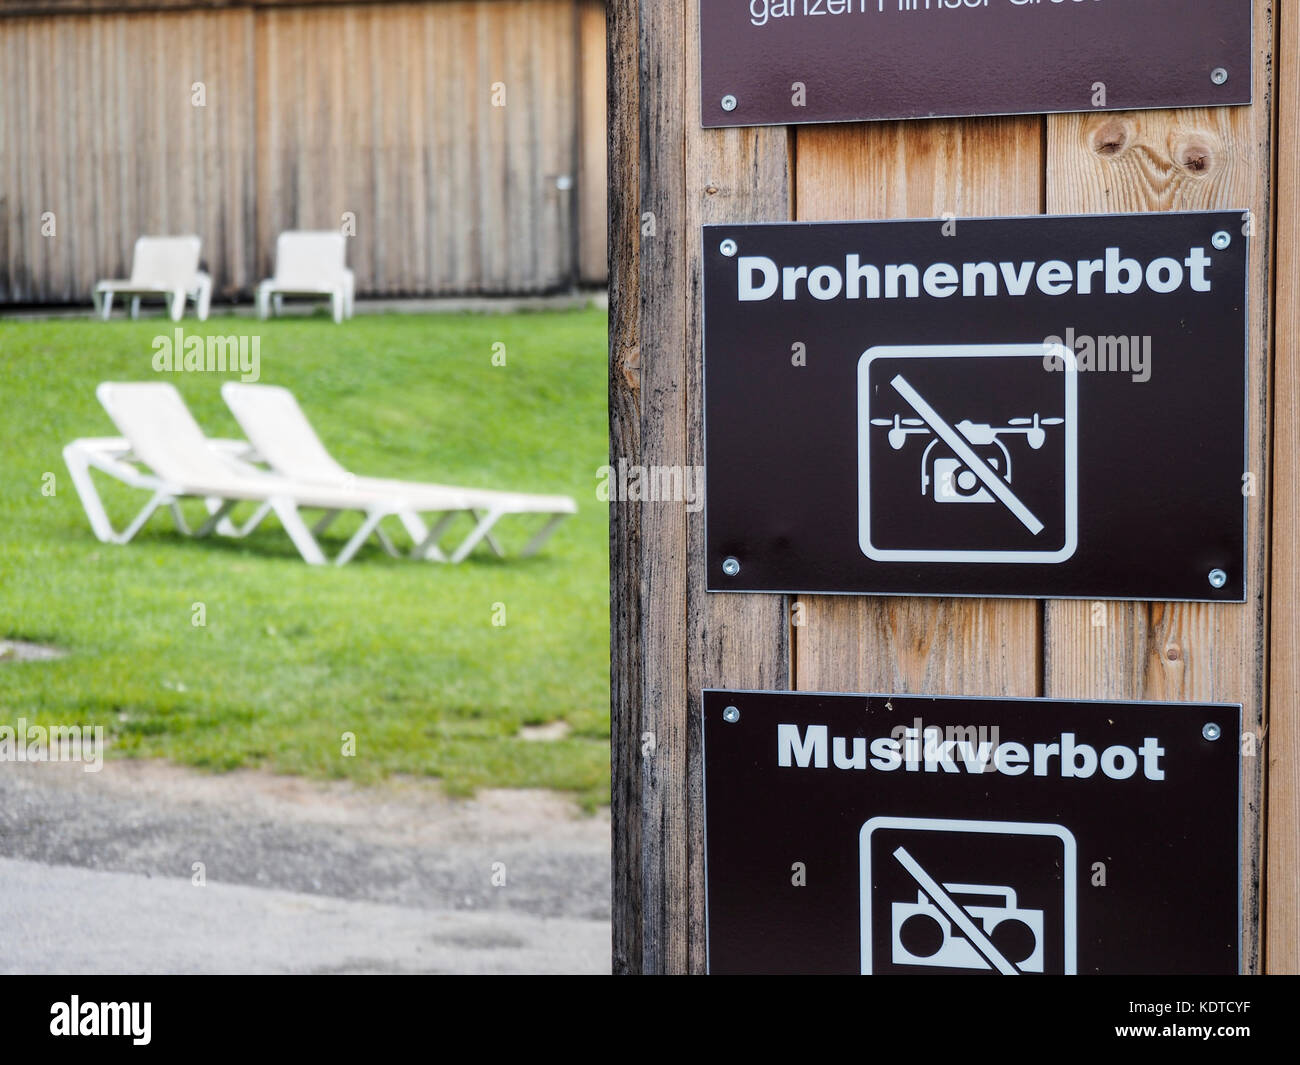 Drohnenverbot (German for 'Drones not allowed') sign at a public swimming baths in Switzerland. Stock Photo